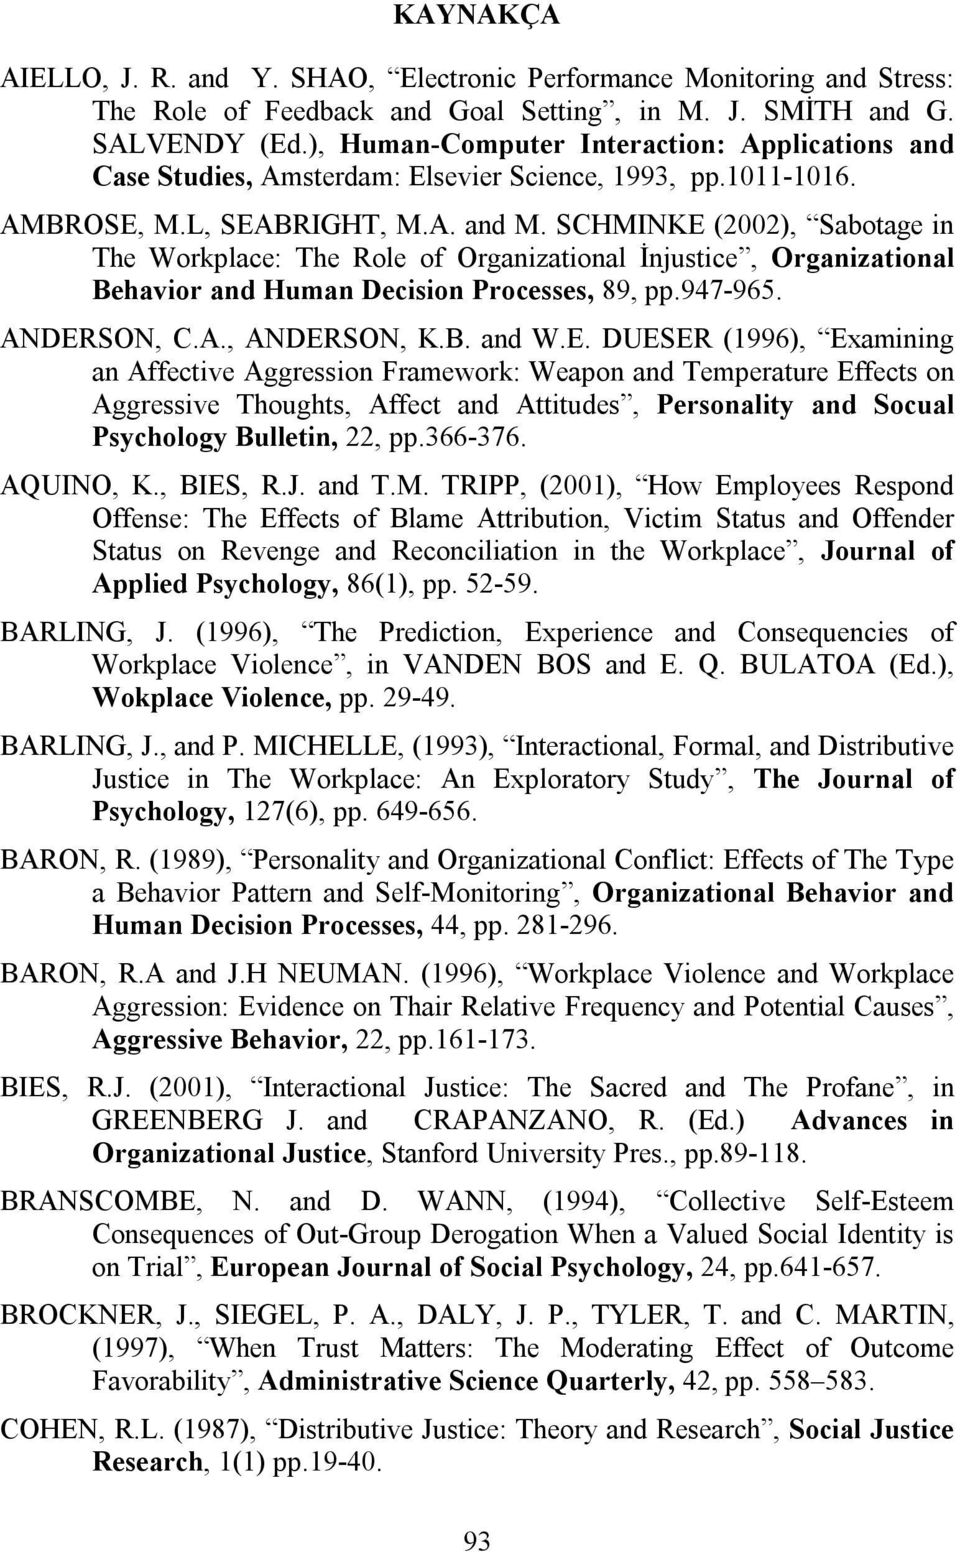 SCHMINKE (2002), Sabotage in The Workplace: The Role of Organizational İnjustice, Organizational Behavior and Human Decision Processes, 89, pp.947-965. ANDERSON, C.A., ANDERSON, K.B. and W.E. DUESER (1996), Examining an Affective Aggression Framework: Weapon and Temperature Effects on Aggressive Thoughts, Affect and Attitudes, Personality and Socual Psychology Bulletin, 22, pp.